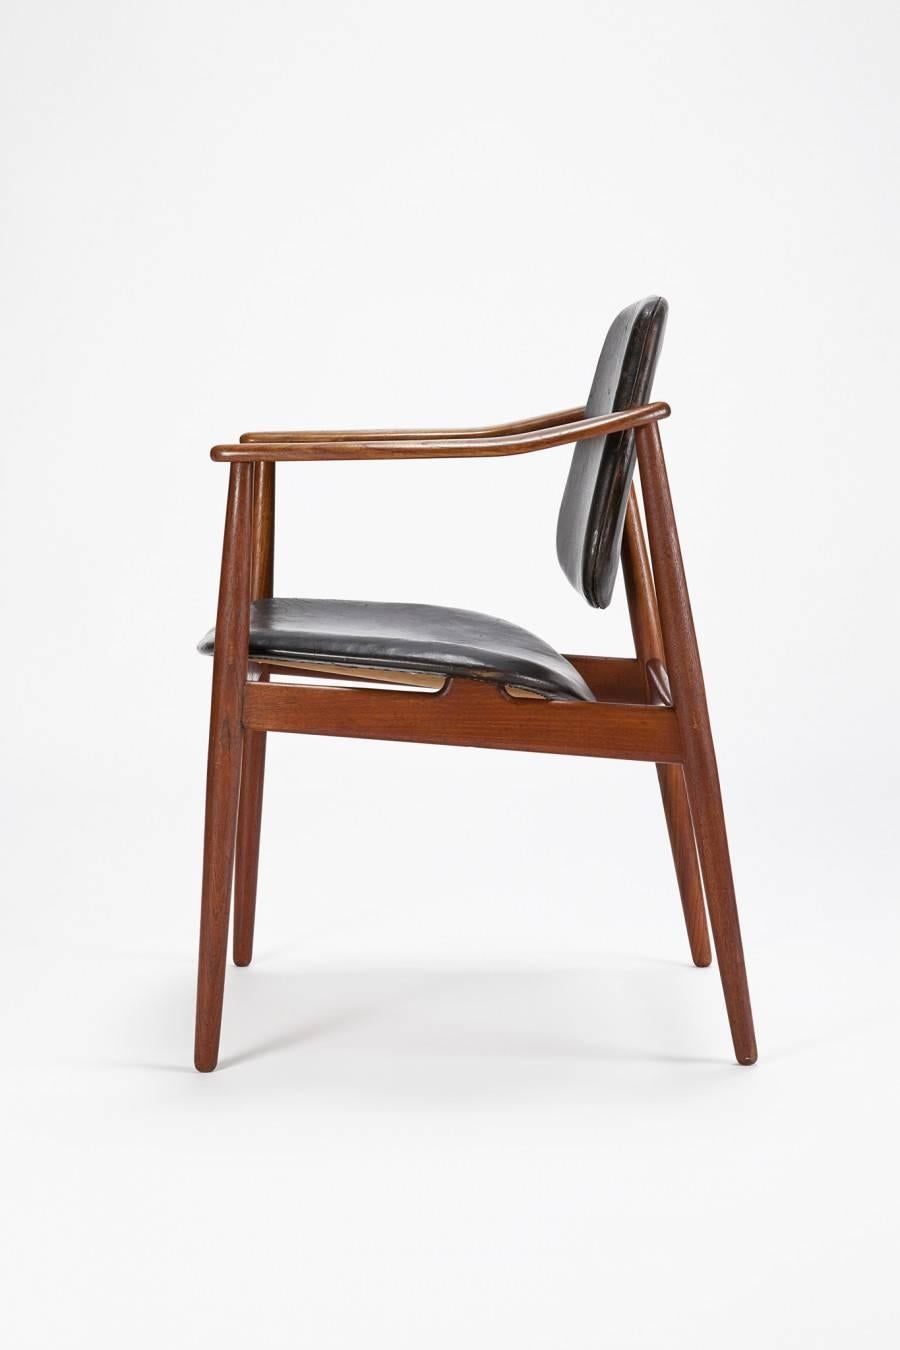 Arne Vodder chair manufactured by Bovirke in Denmark in the 1950s. Seat and back are covered in original black leather and show signs of use and age. The swivel back hardware is made of brass and is attached to the solid teak frame. The pitures are